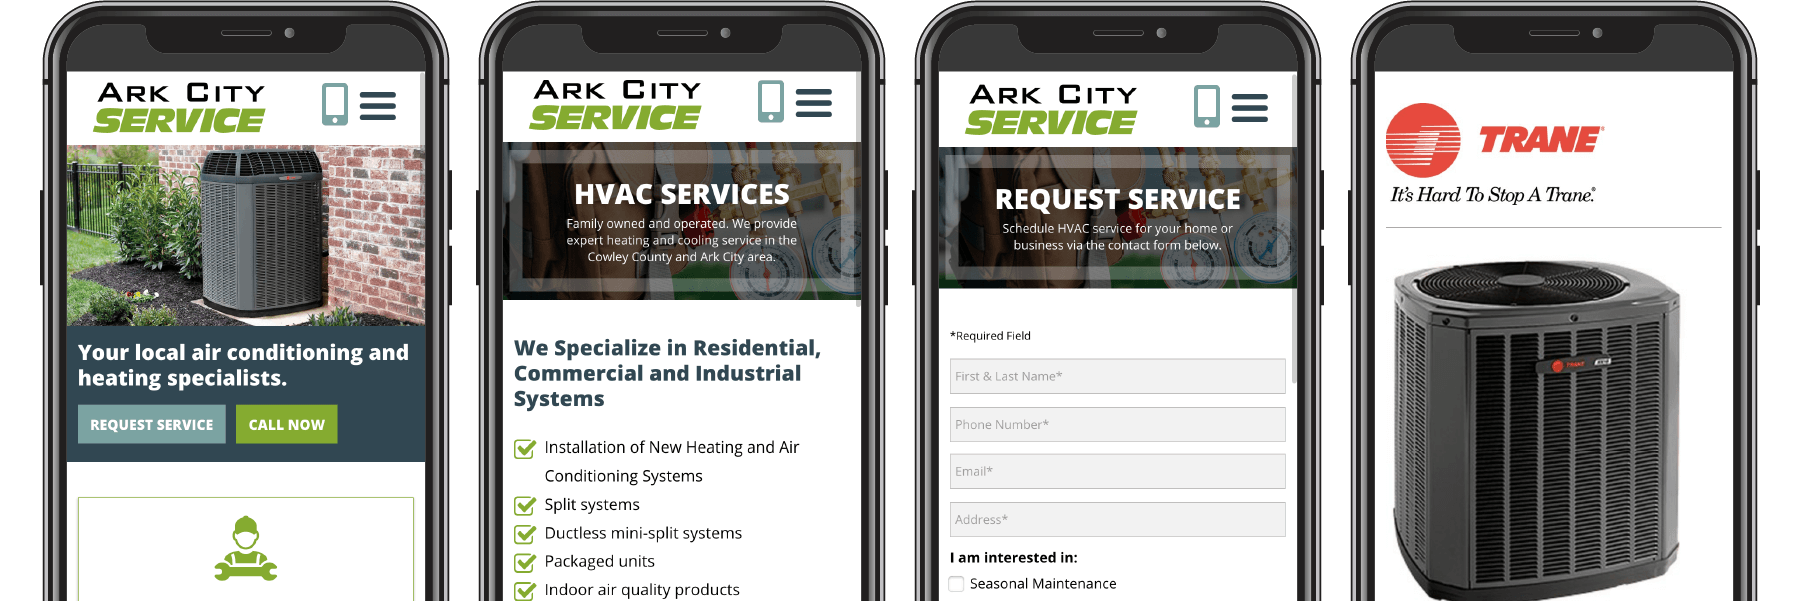 Four pages of the Ark City Service website displayed on four phones.